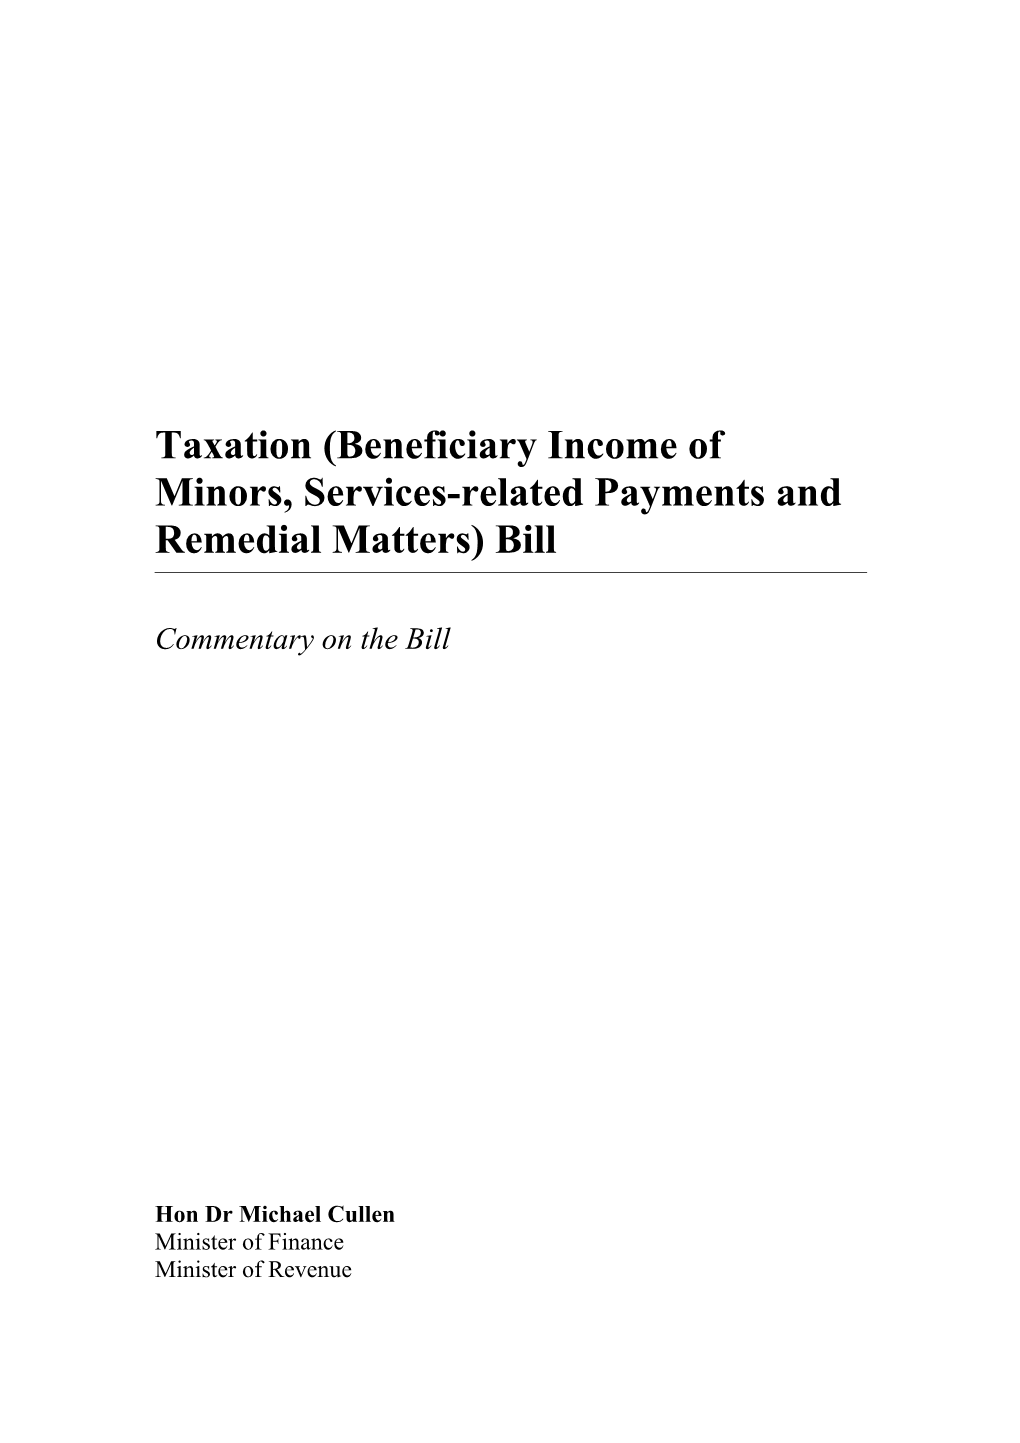 Taxation (Beneficiary Income of Minors, Services-Related Payments and Remedial Matters) Bill